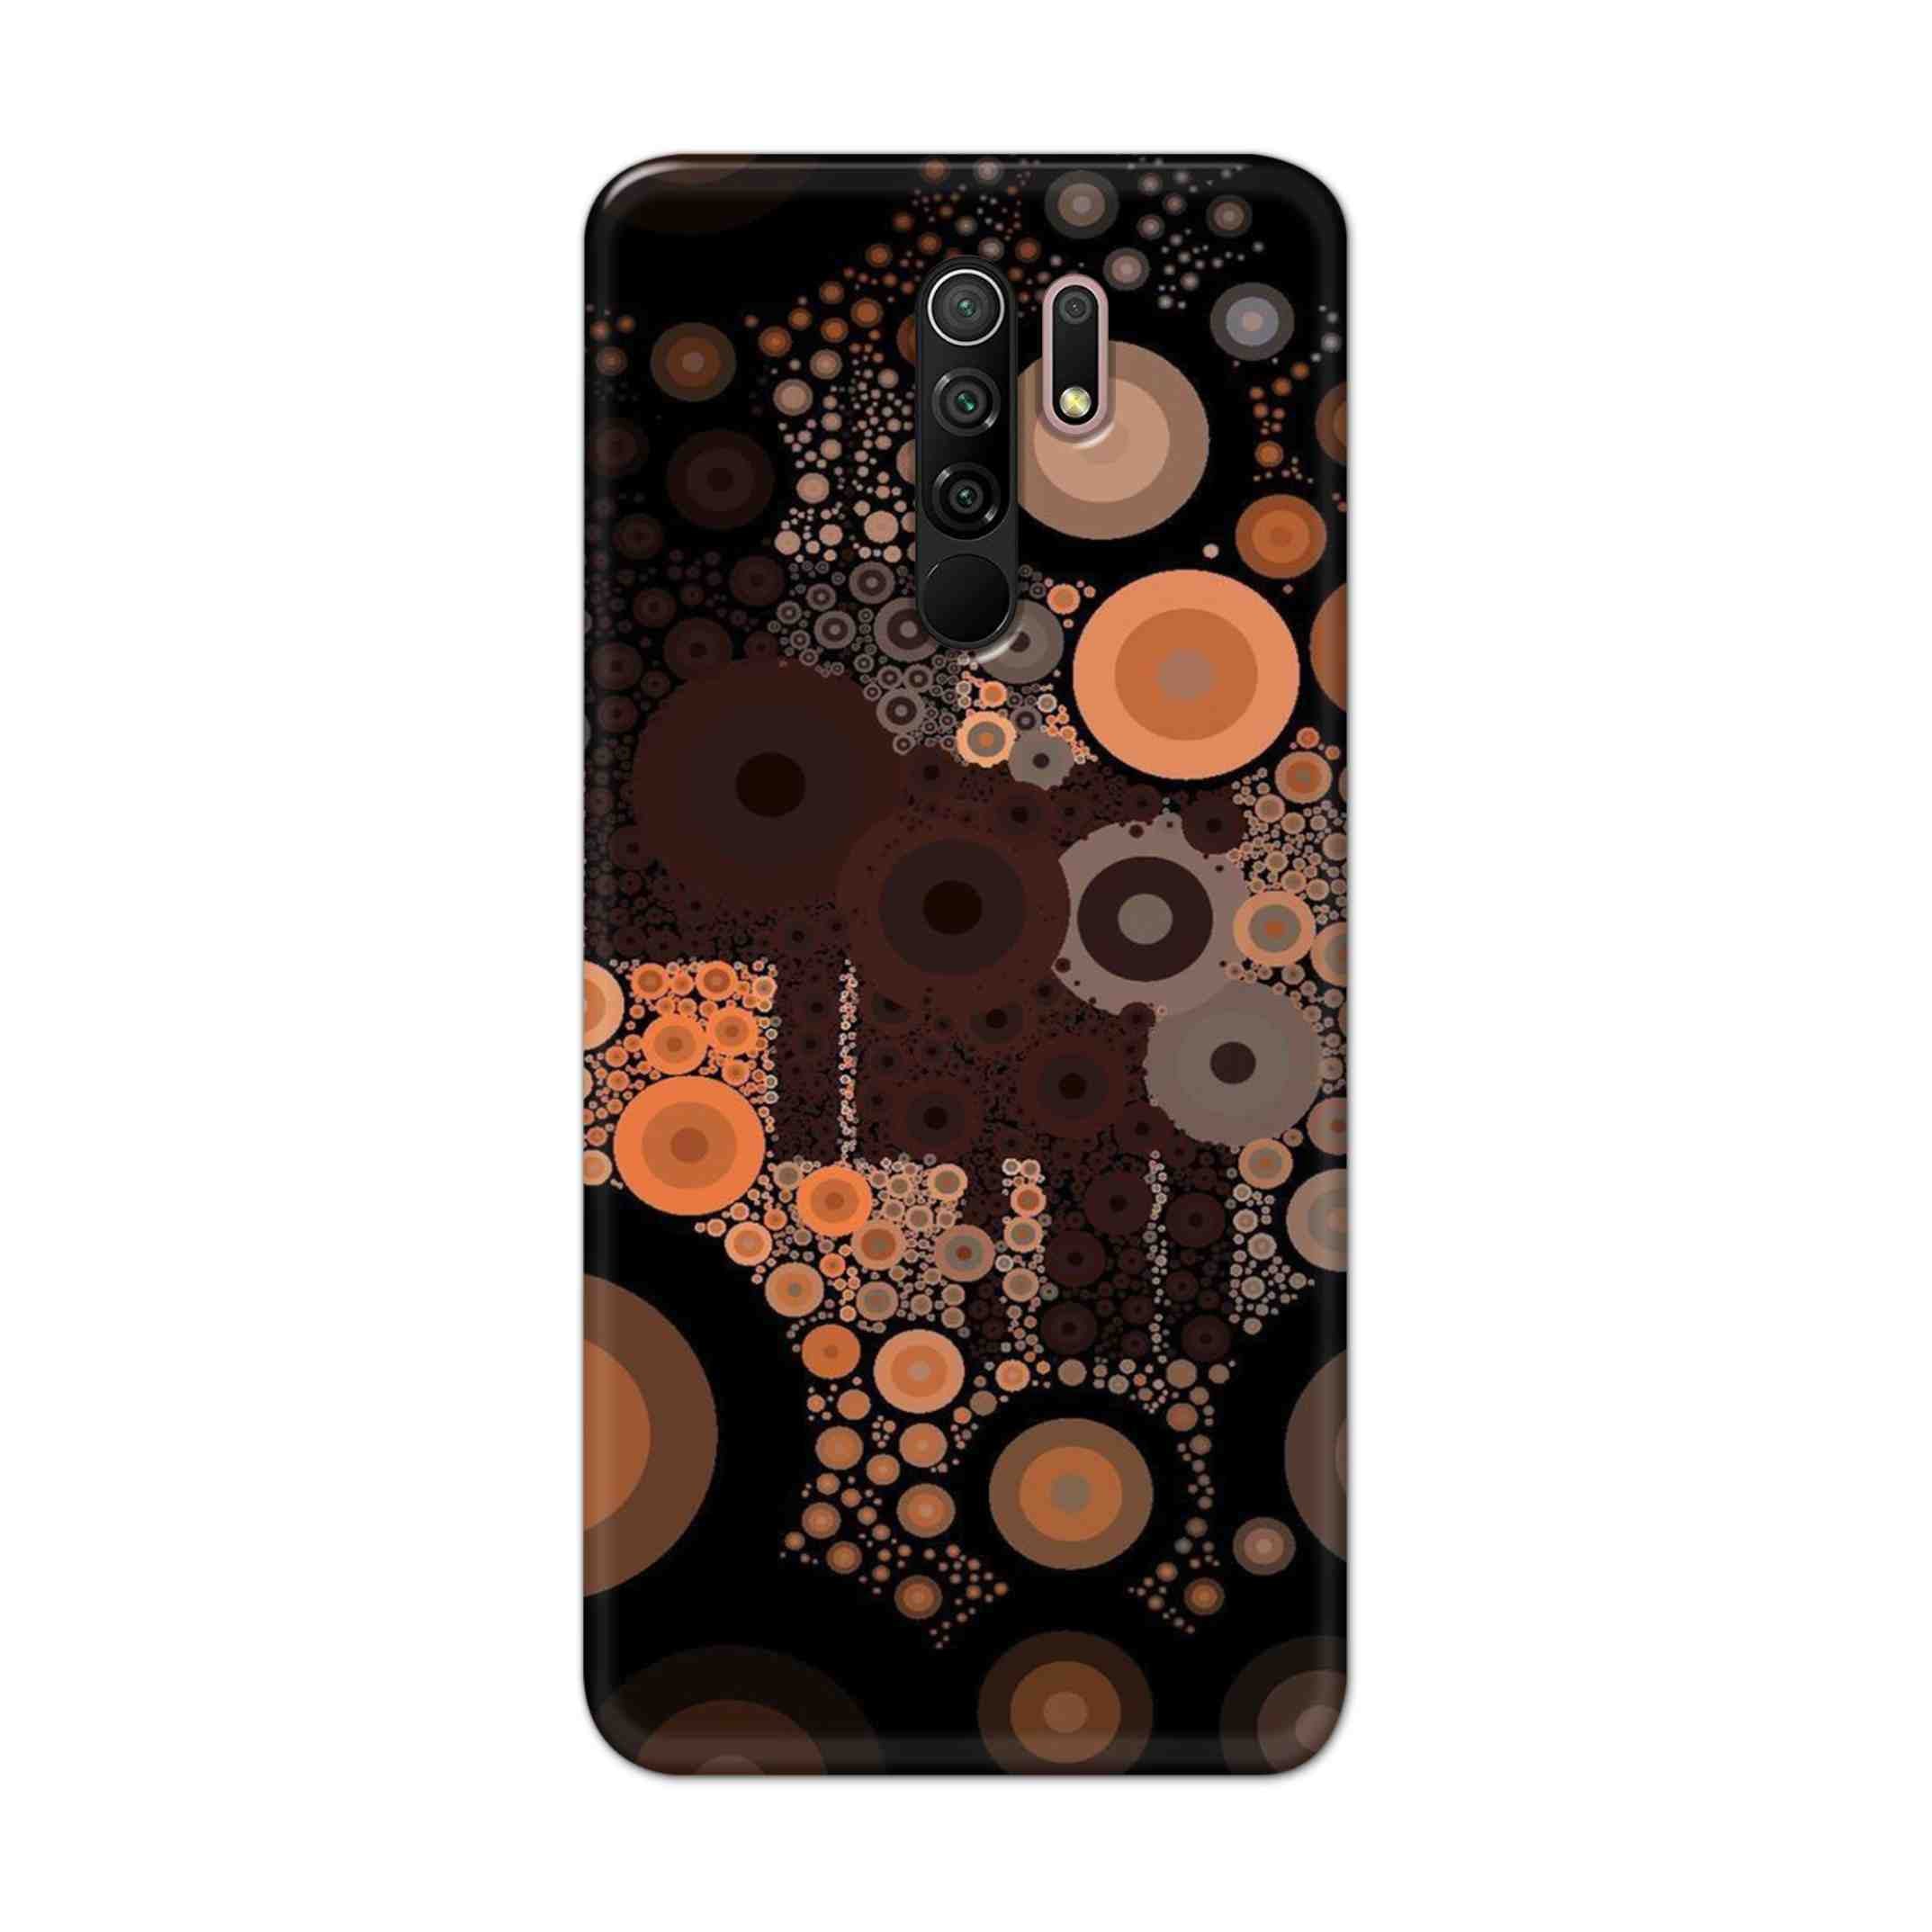 Buy Golden Circle Hard Back Mobile Phone Case Cover For Xiaomi Redmi 9 Prime Online